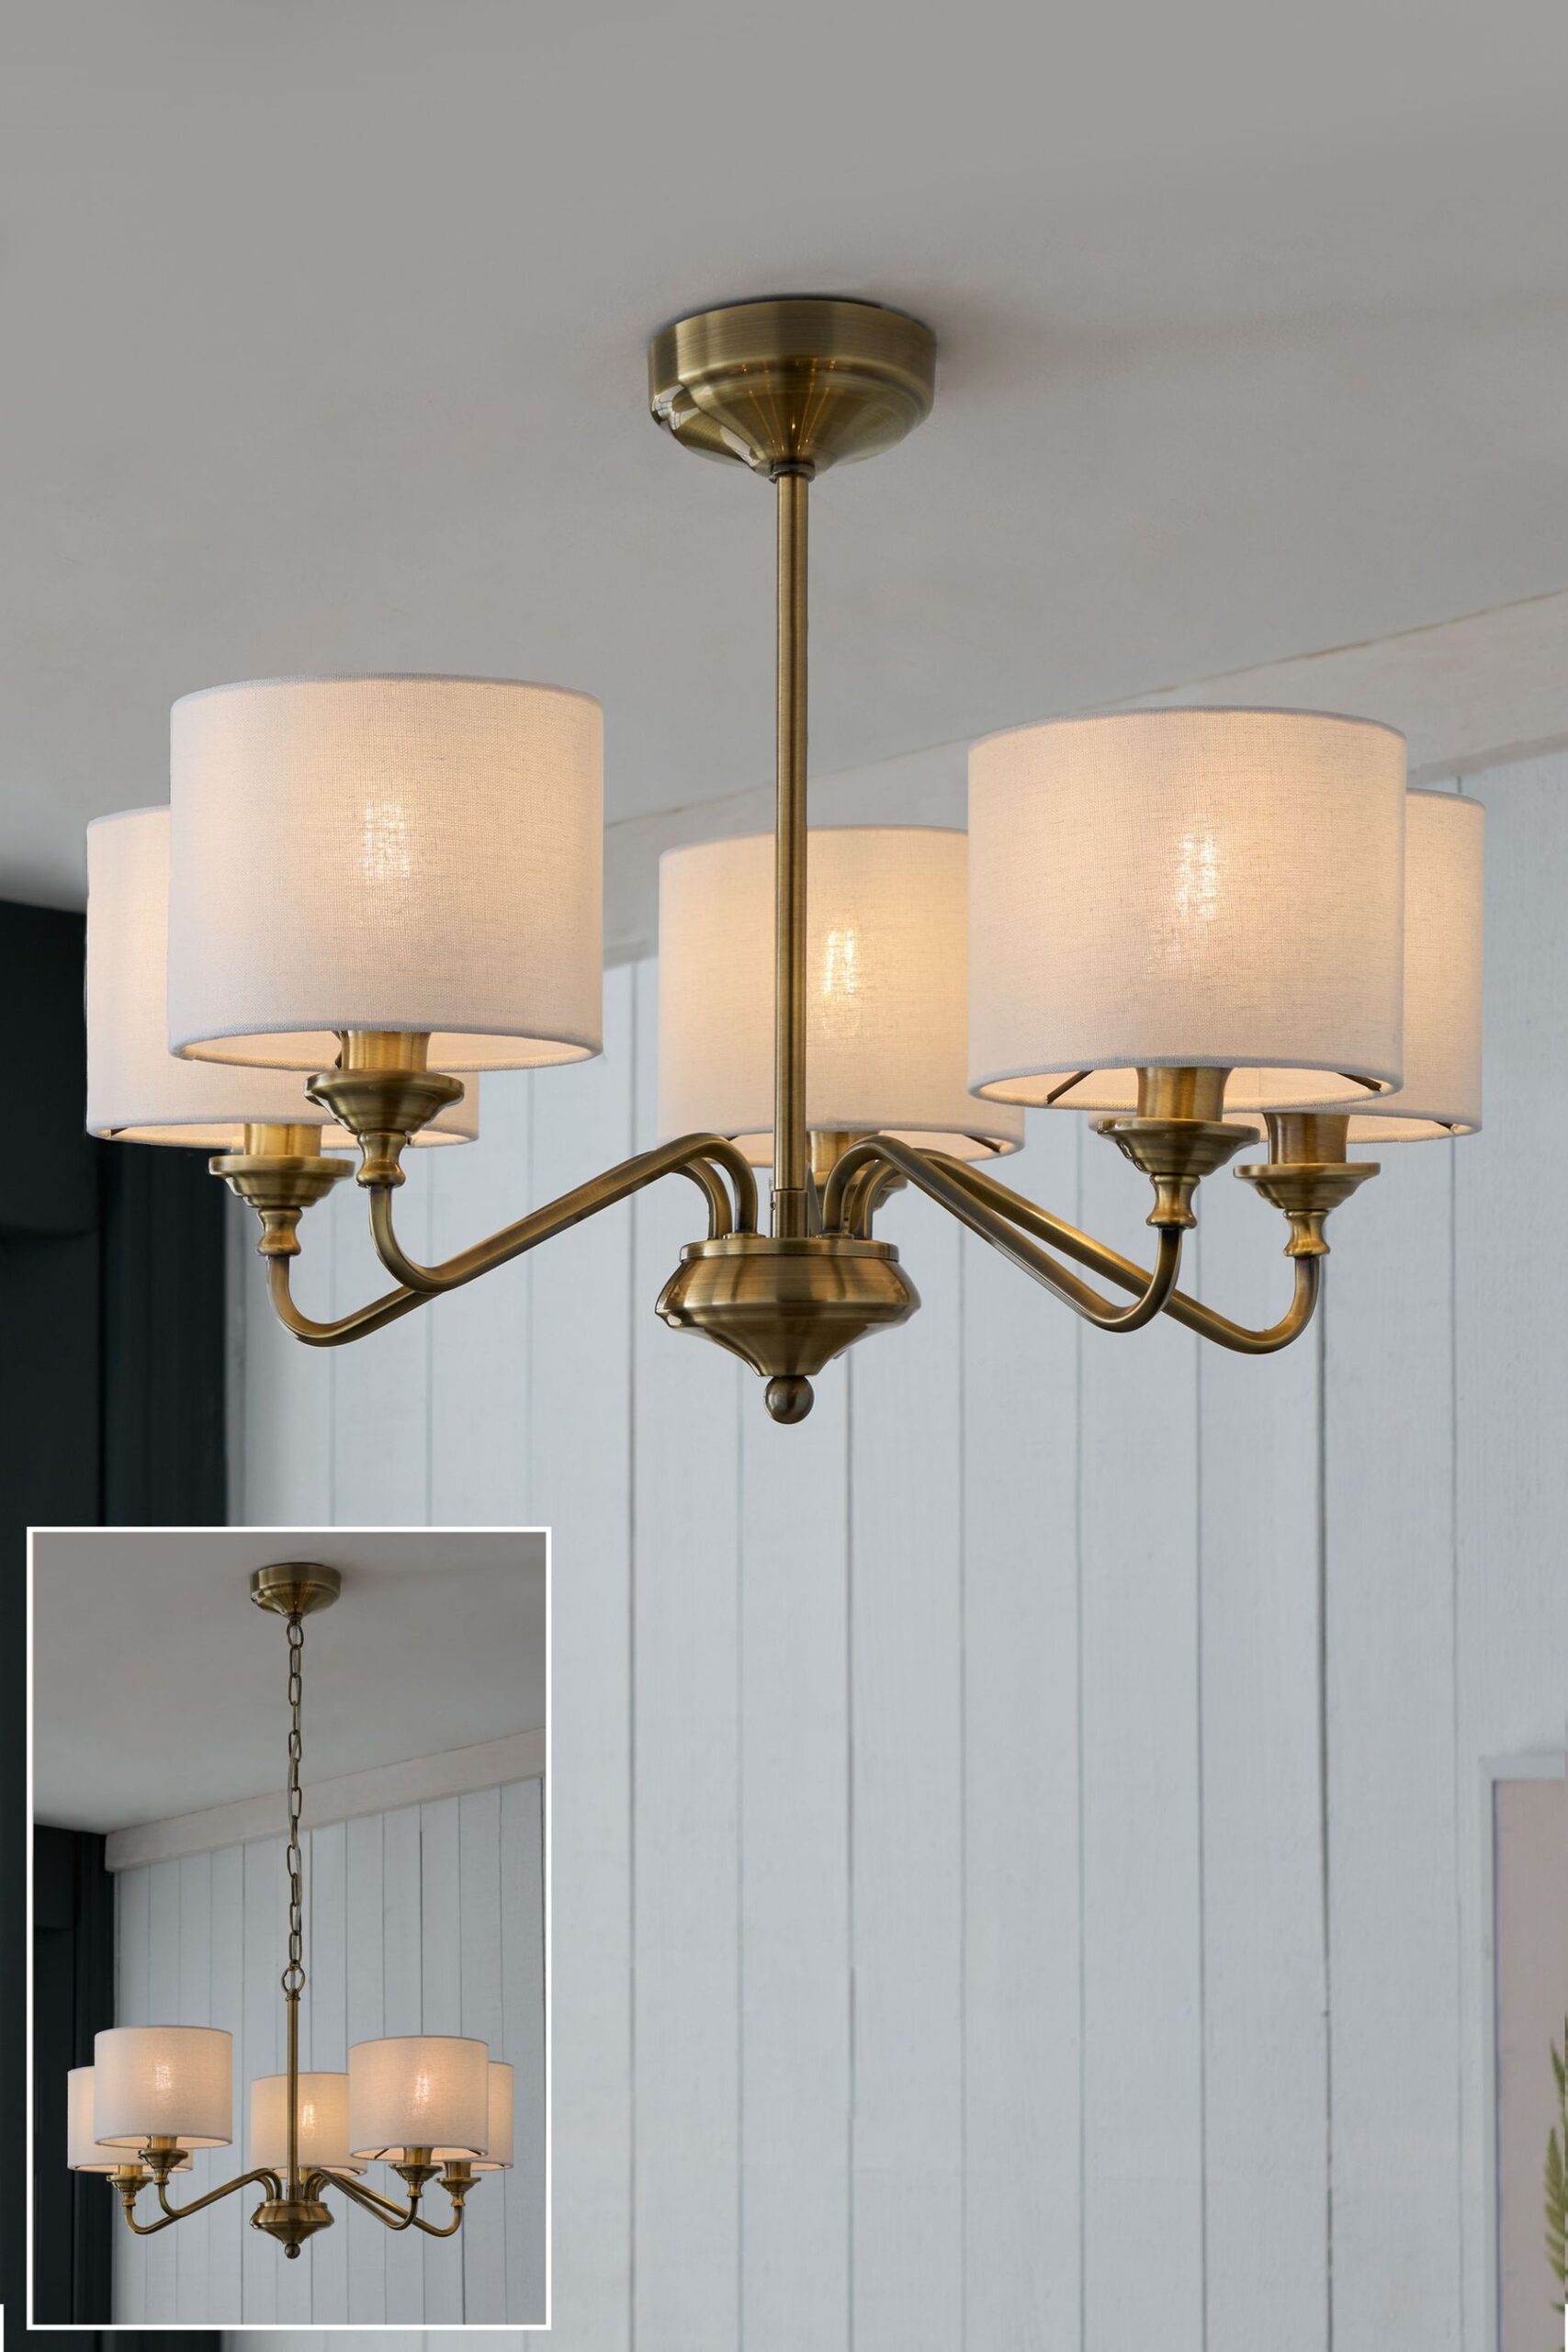 Ceiling Lights Online : Stylish Ceiling Lights Brighten Up Your Space Online Shopping Tips